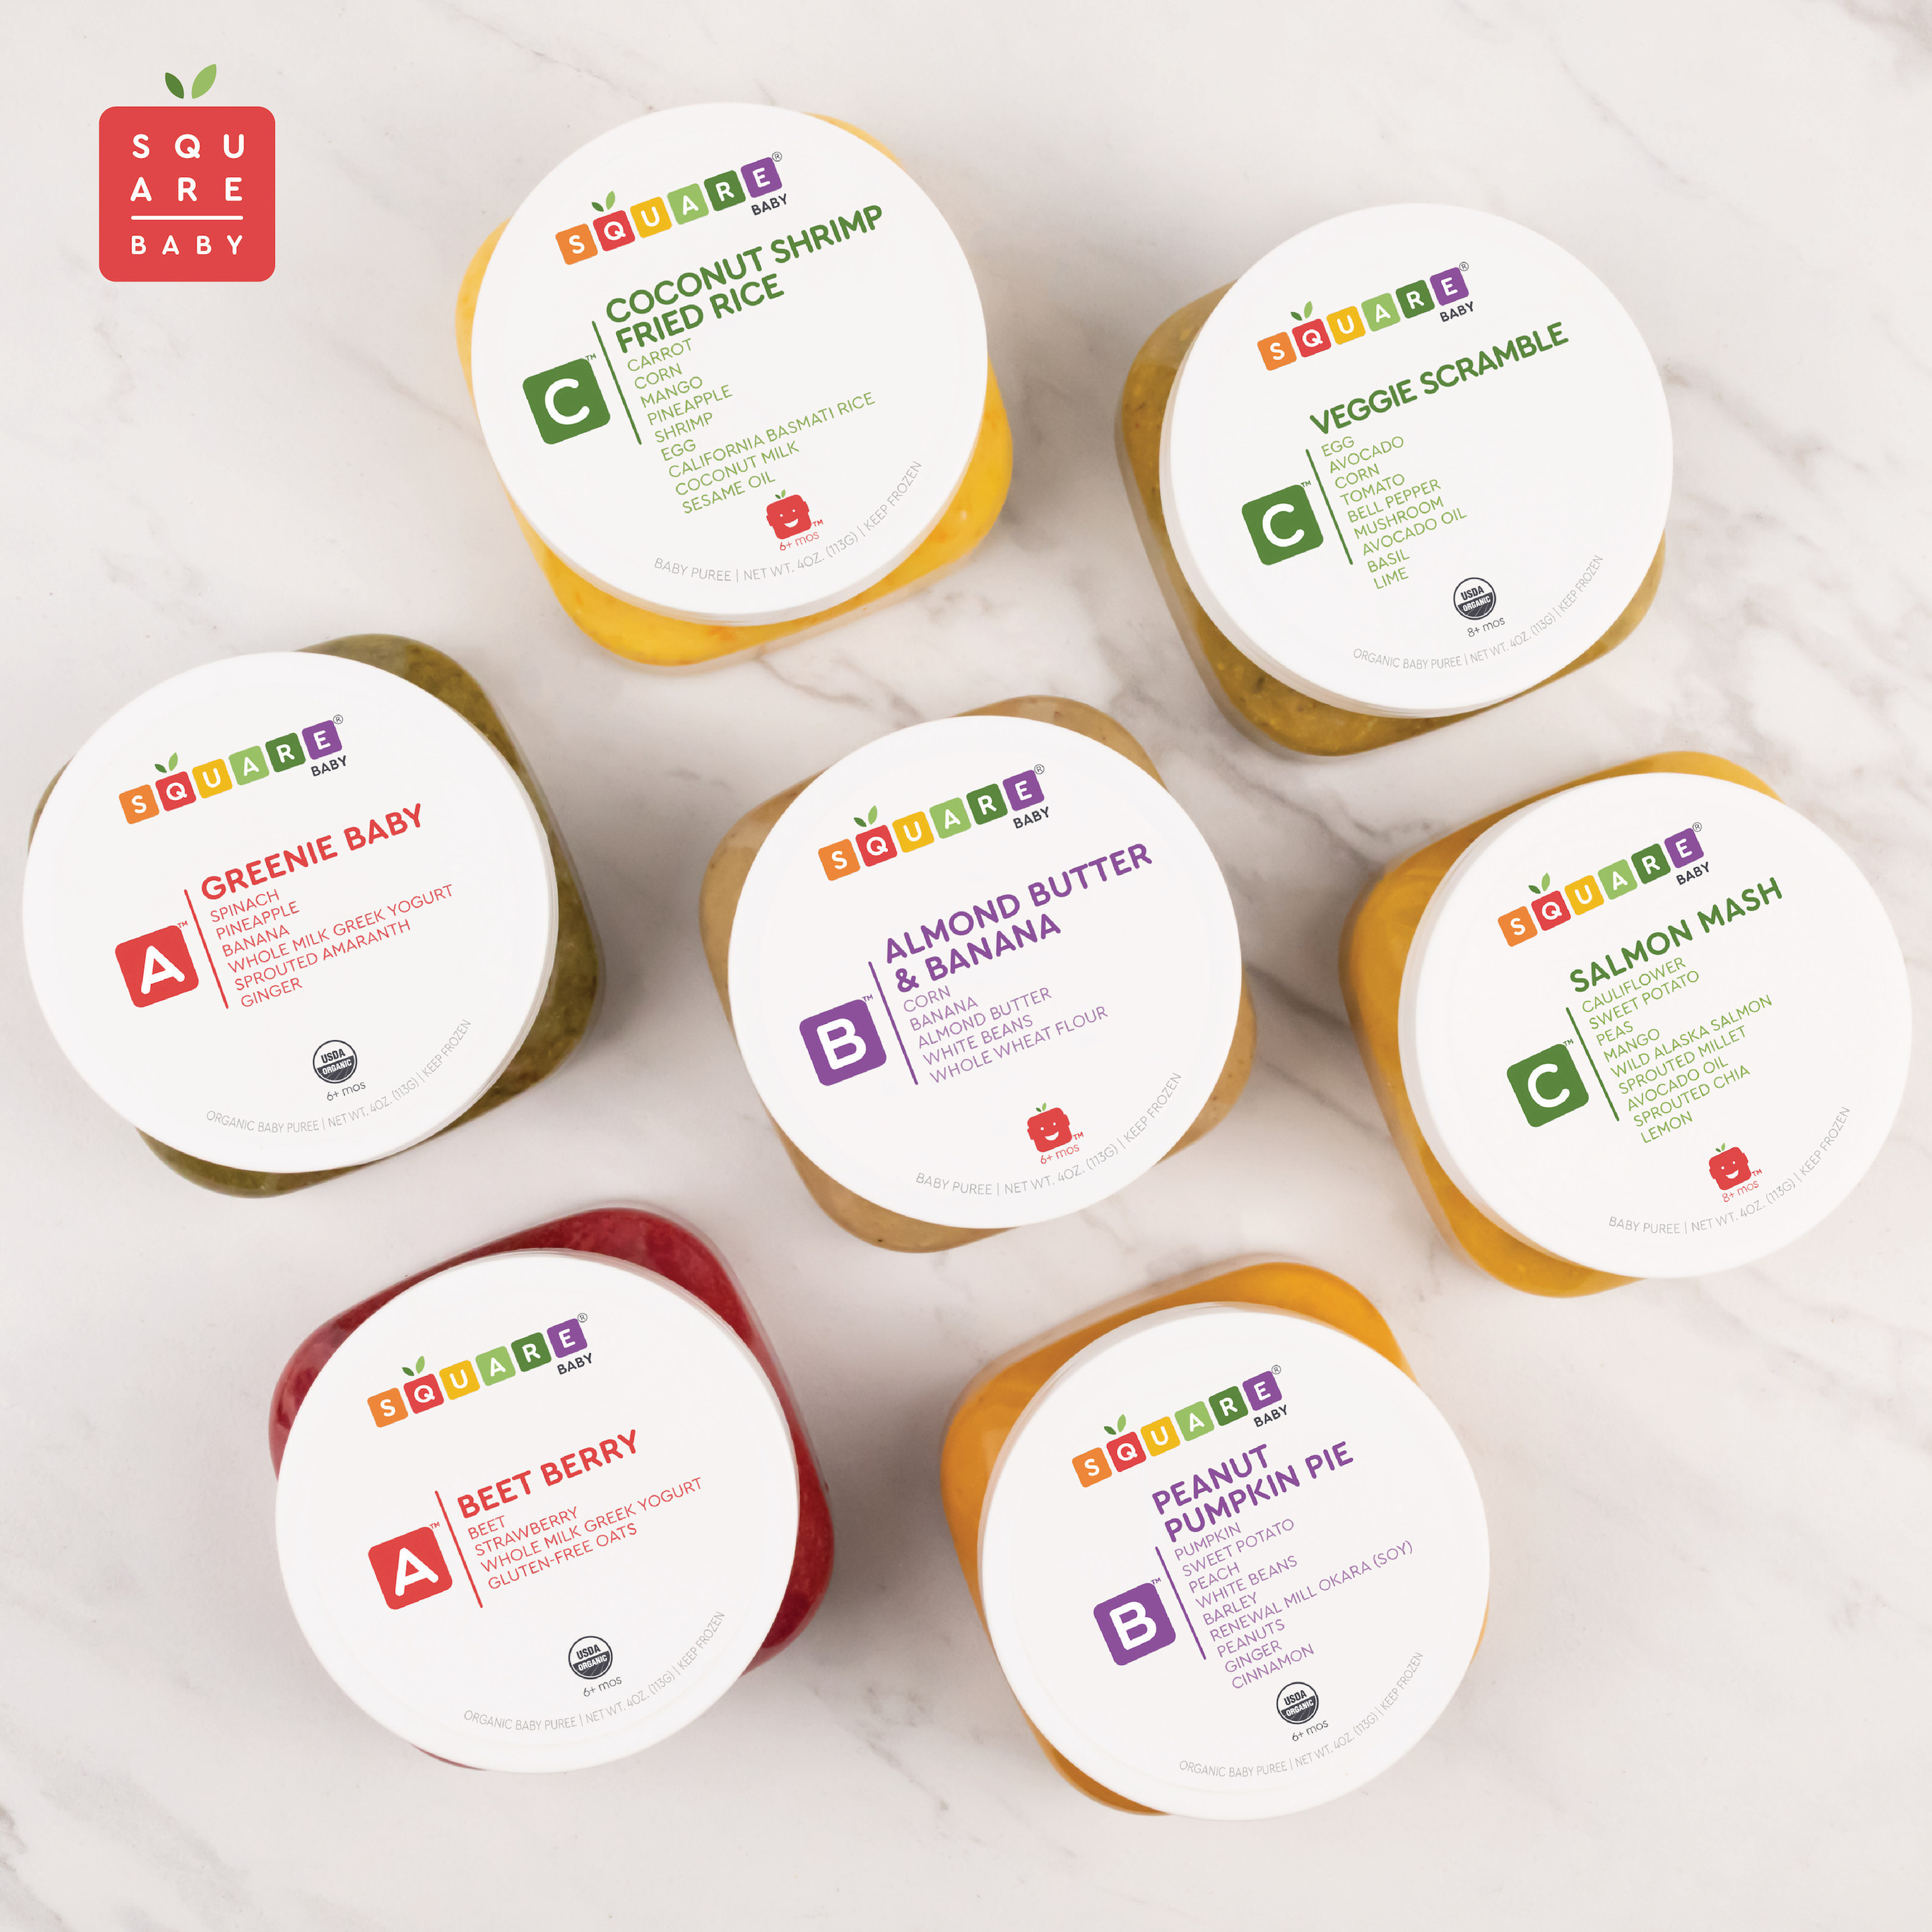 You Can Now Order Coconut Shrimp Fried Rice Baby Food Thanks to Square Baby